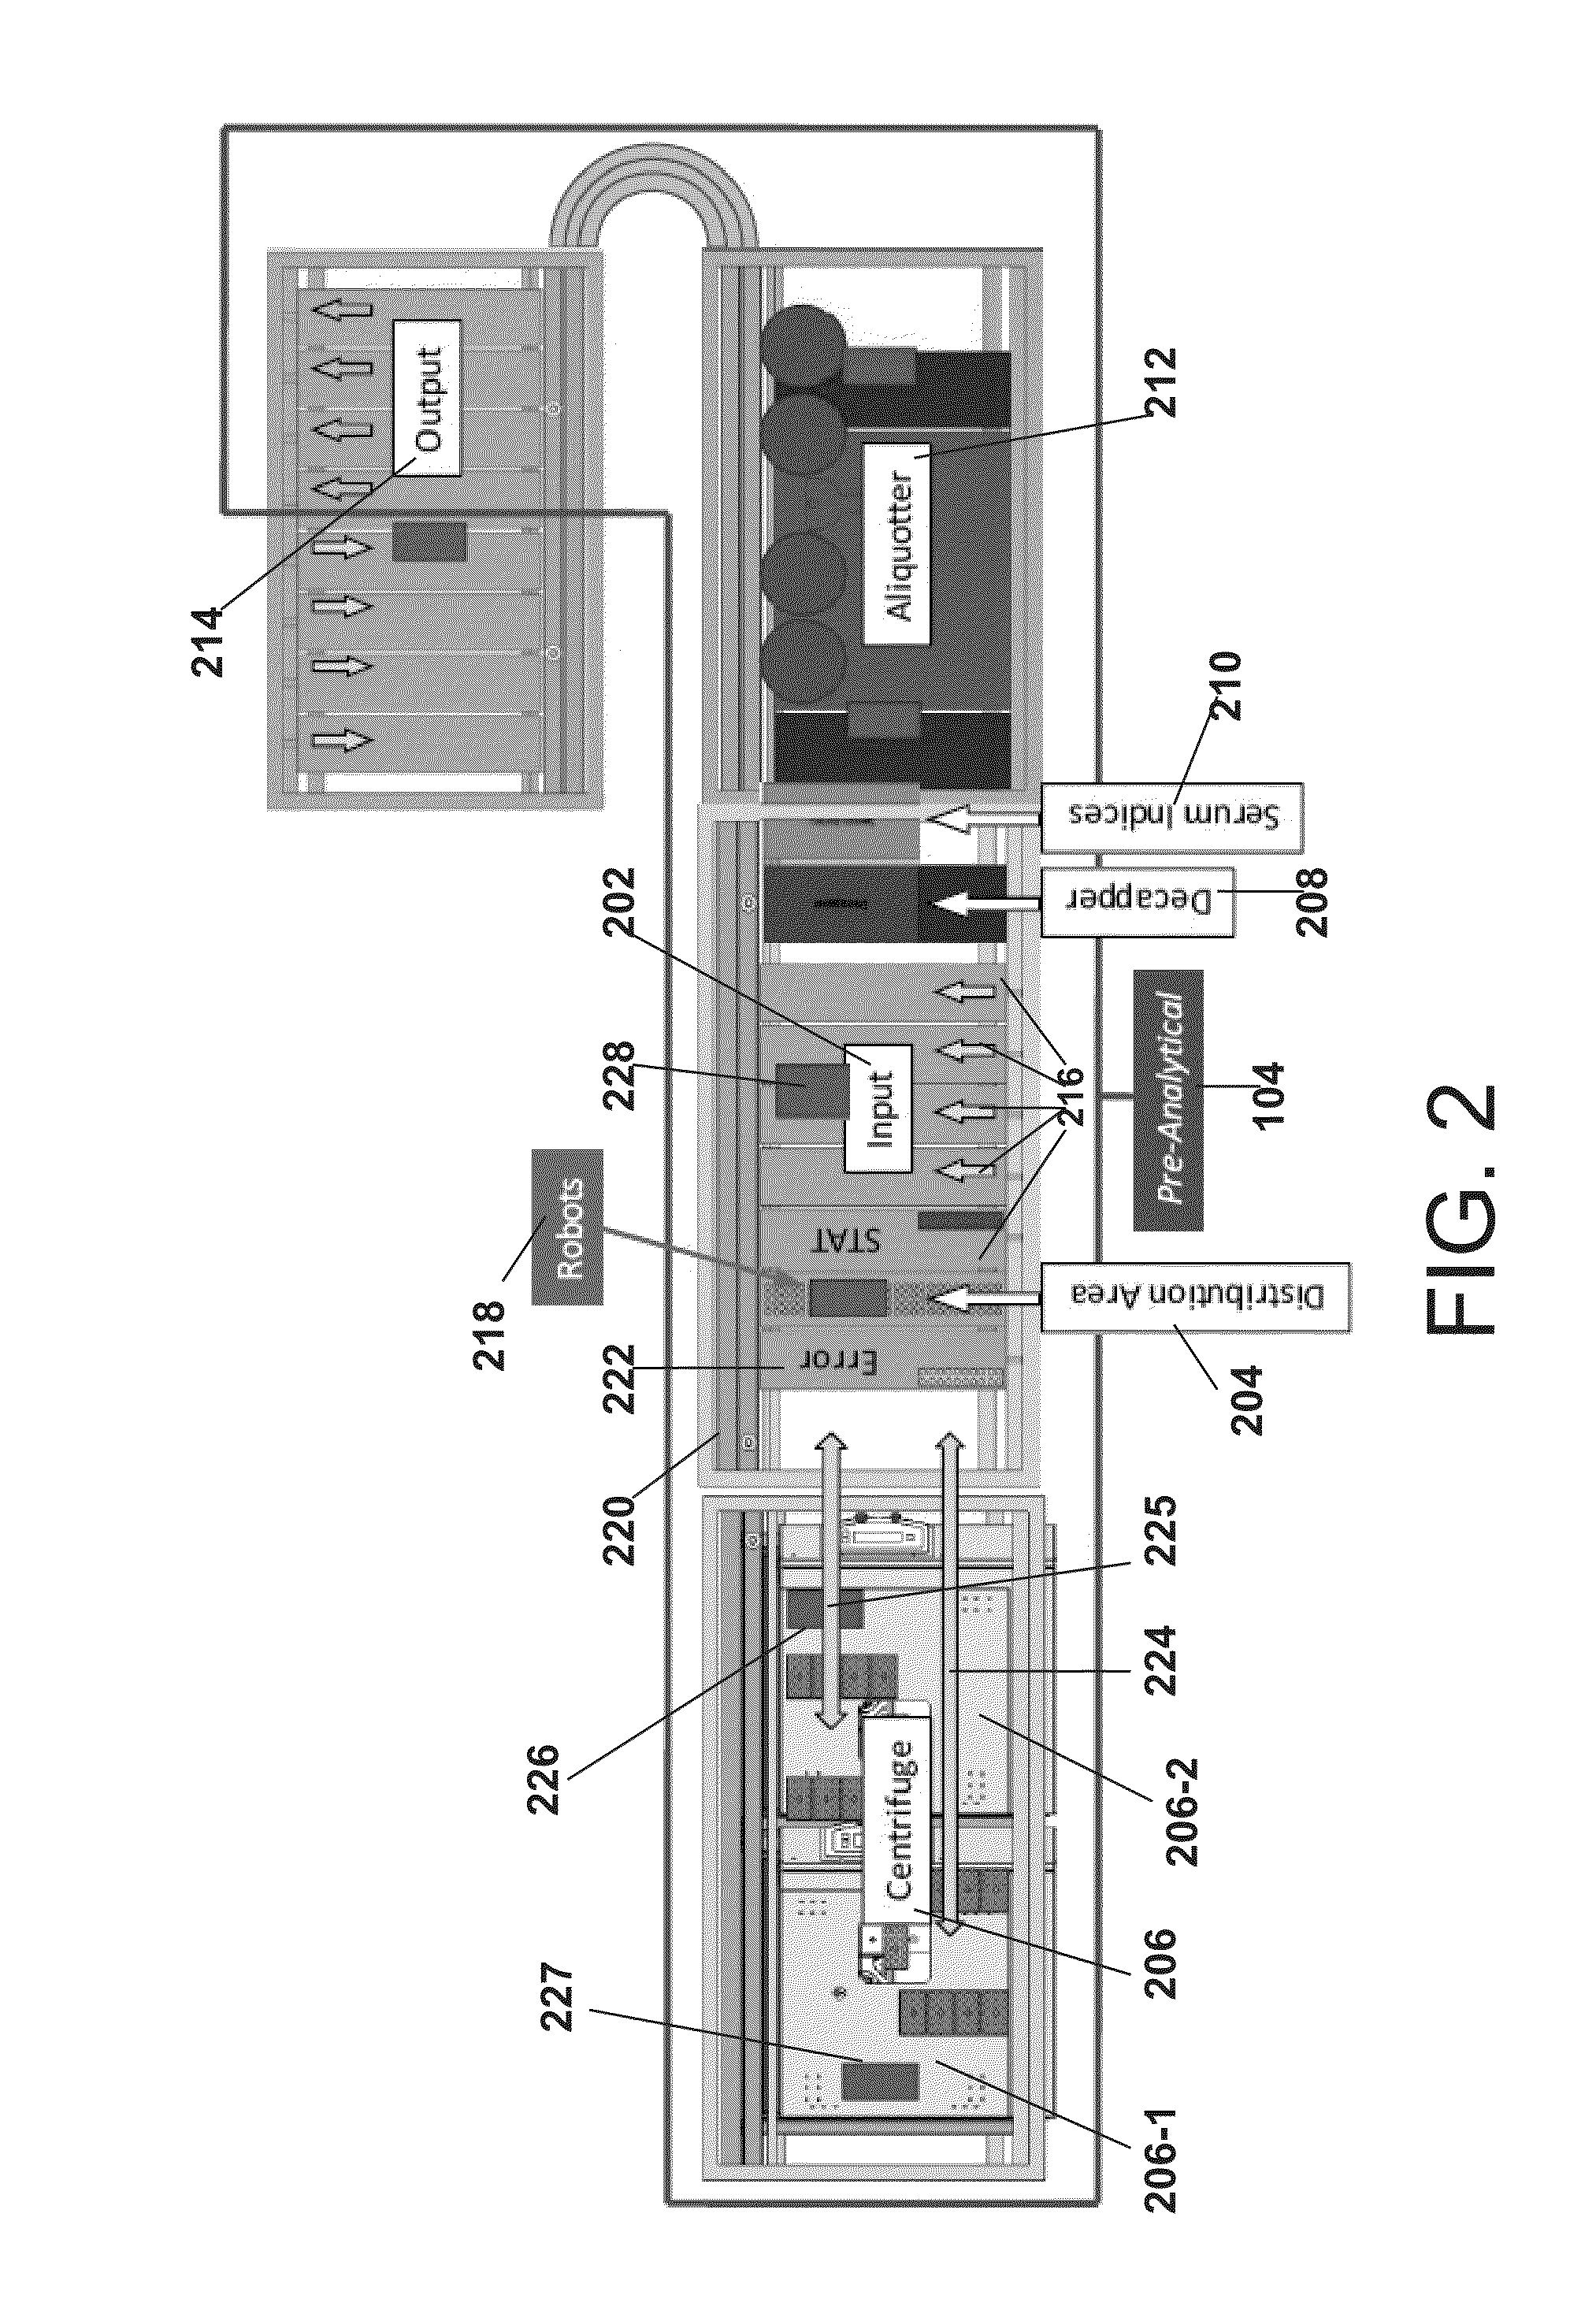 Centrifuge system and workflow